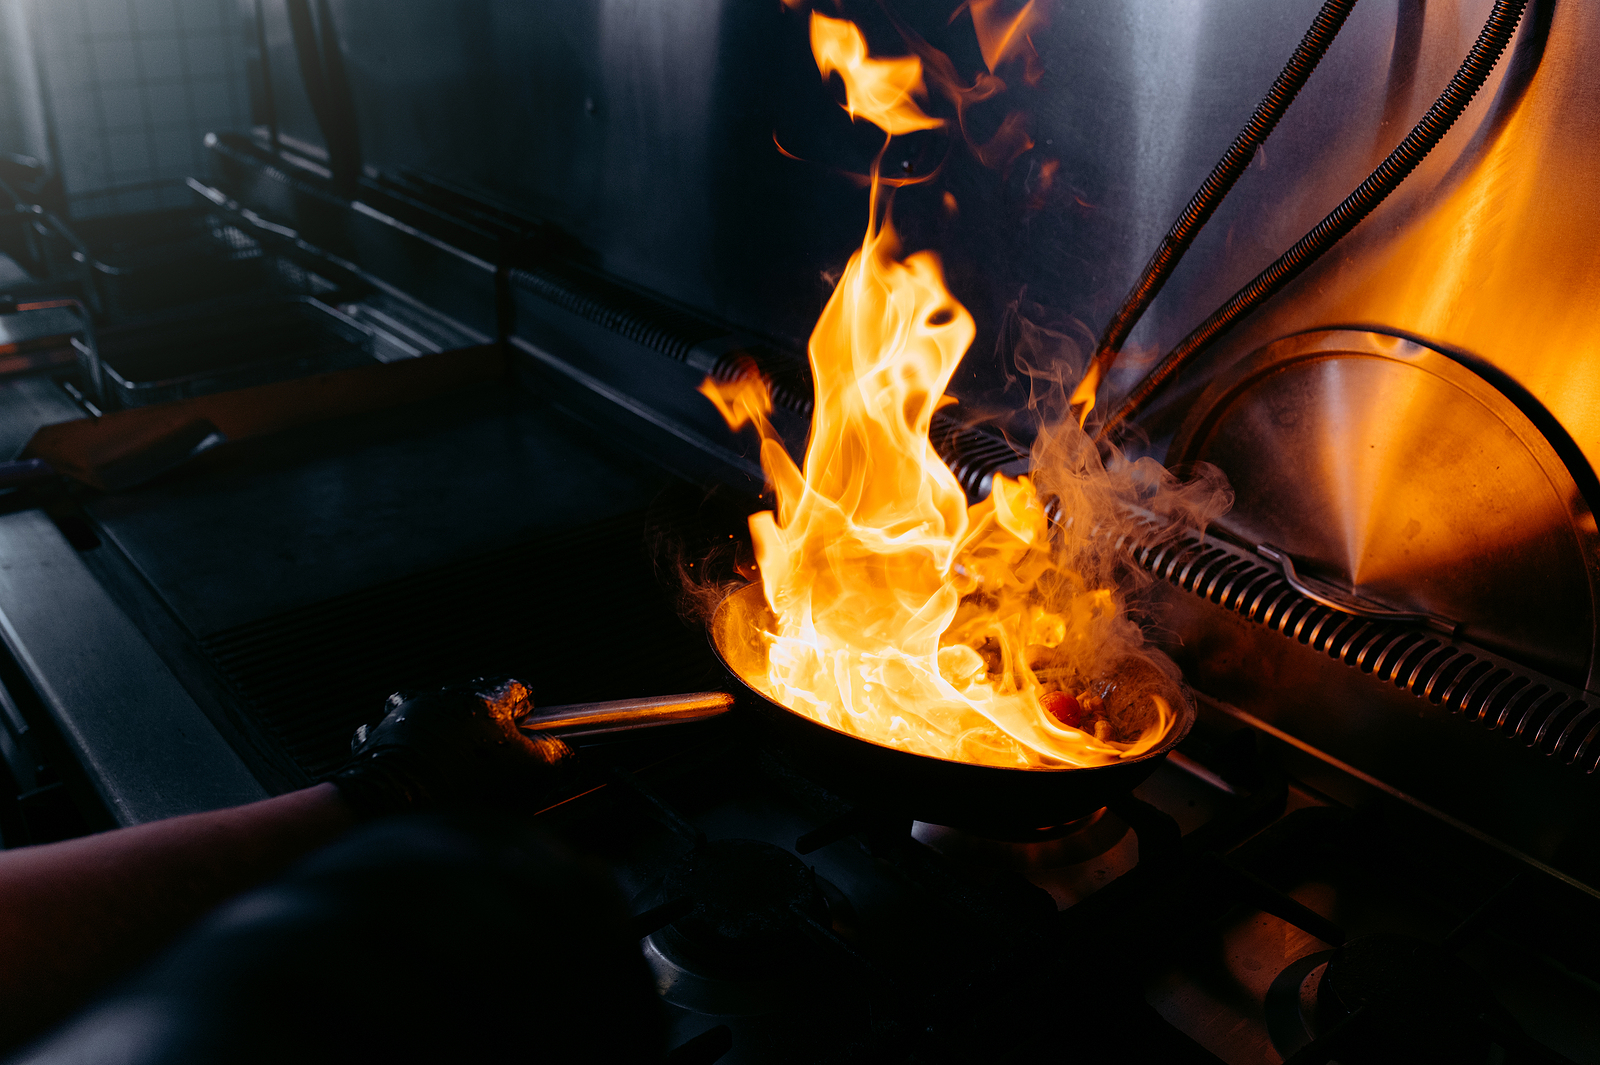 commercial gas safety inspections - Fire in the kitchen